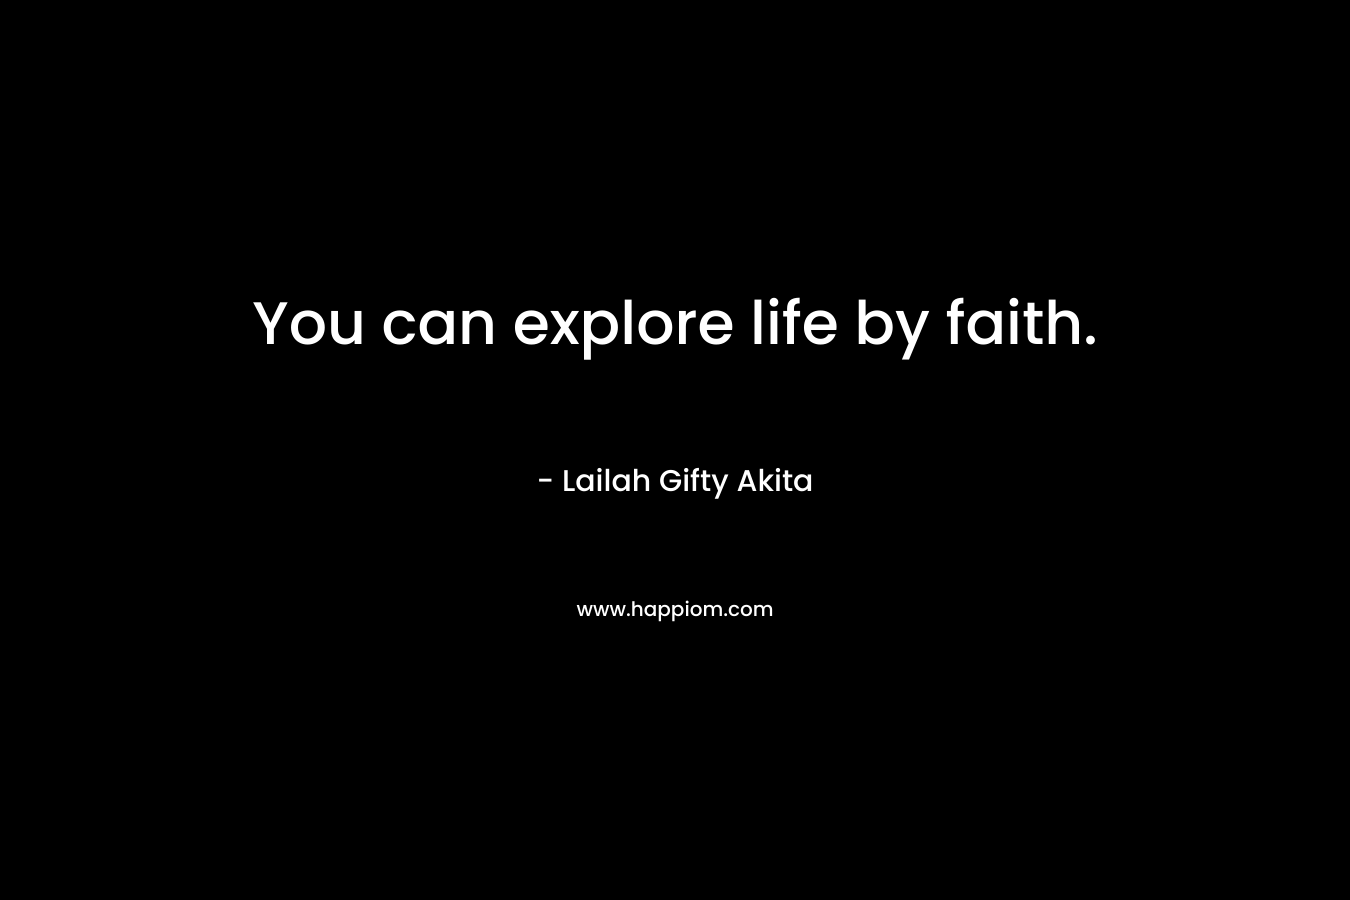 You can explore life by faith.